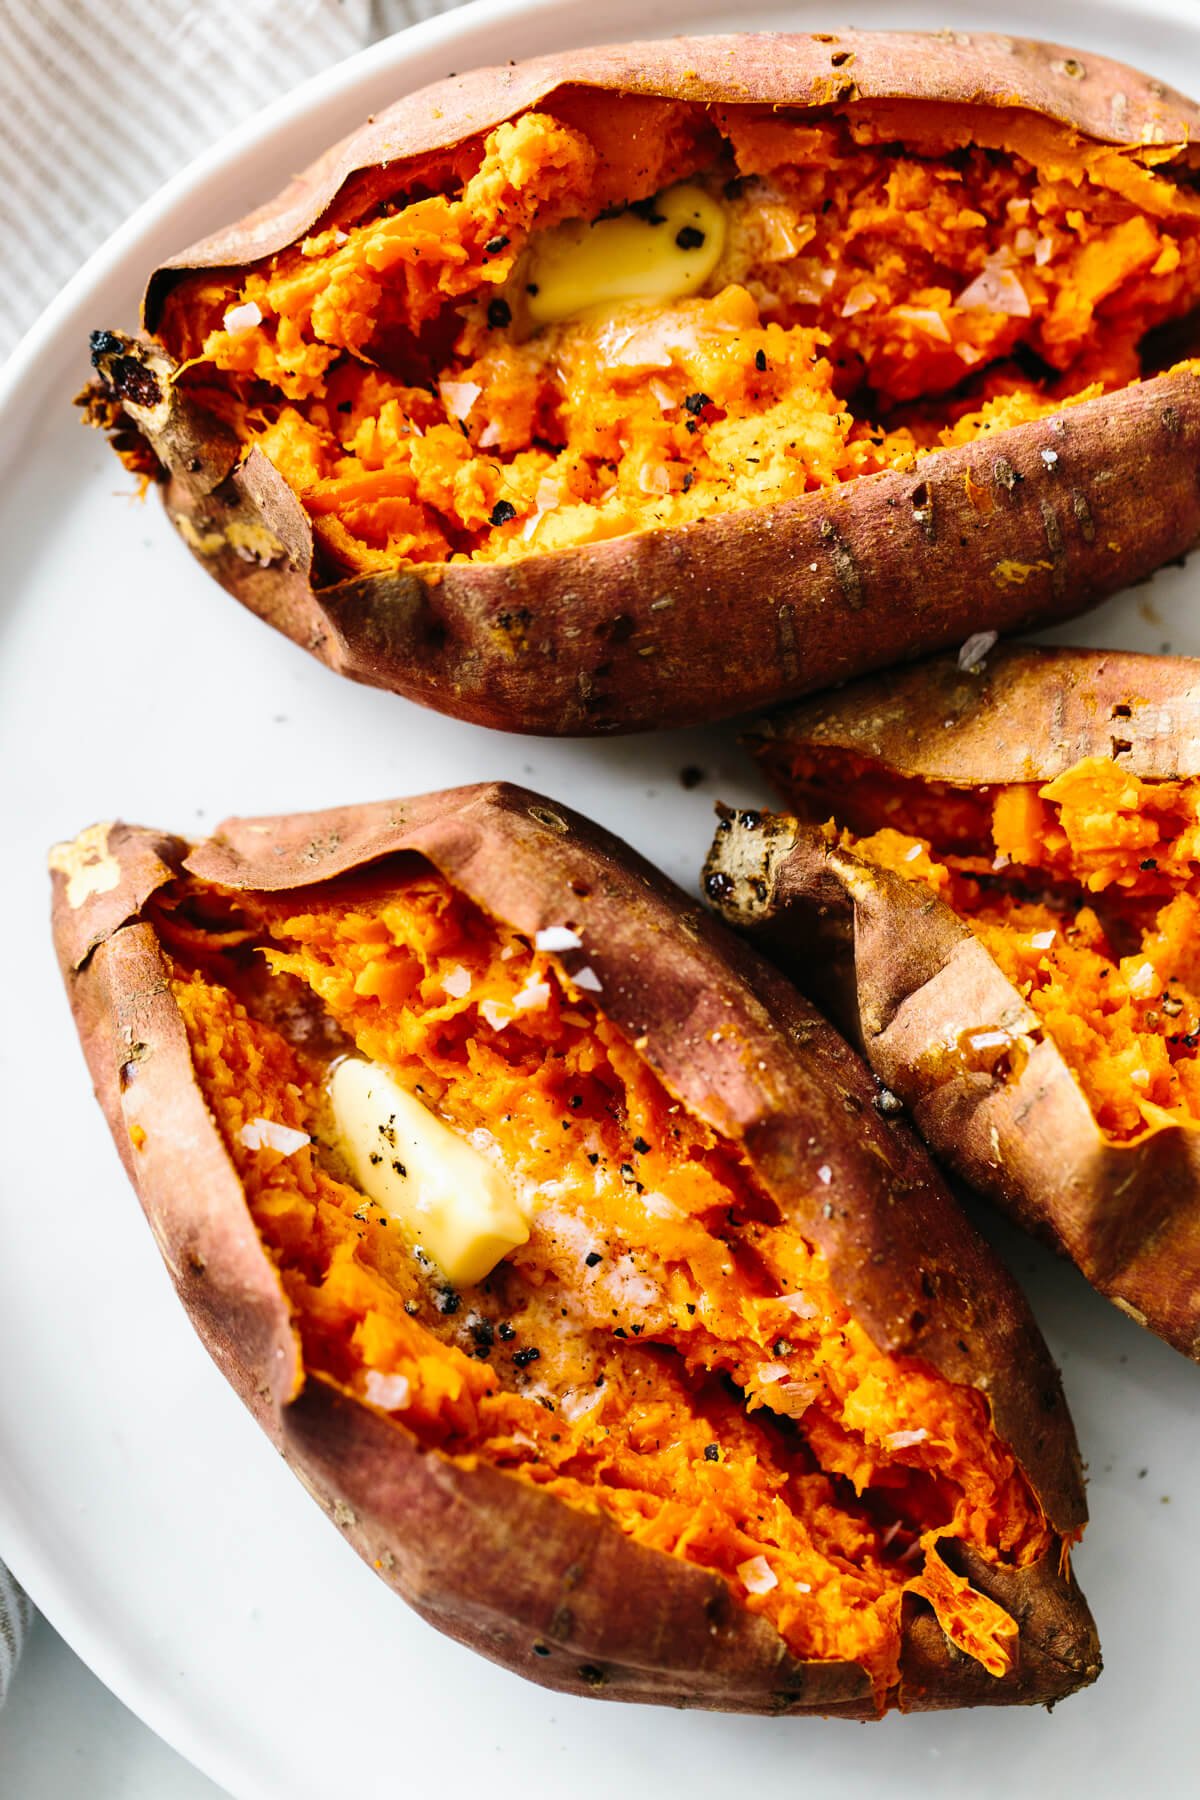 Baked sweet potato is a healthy side dish or main meal. Learn how to bake sweet potatoes in the oven perfectly.